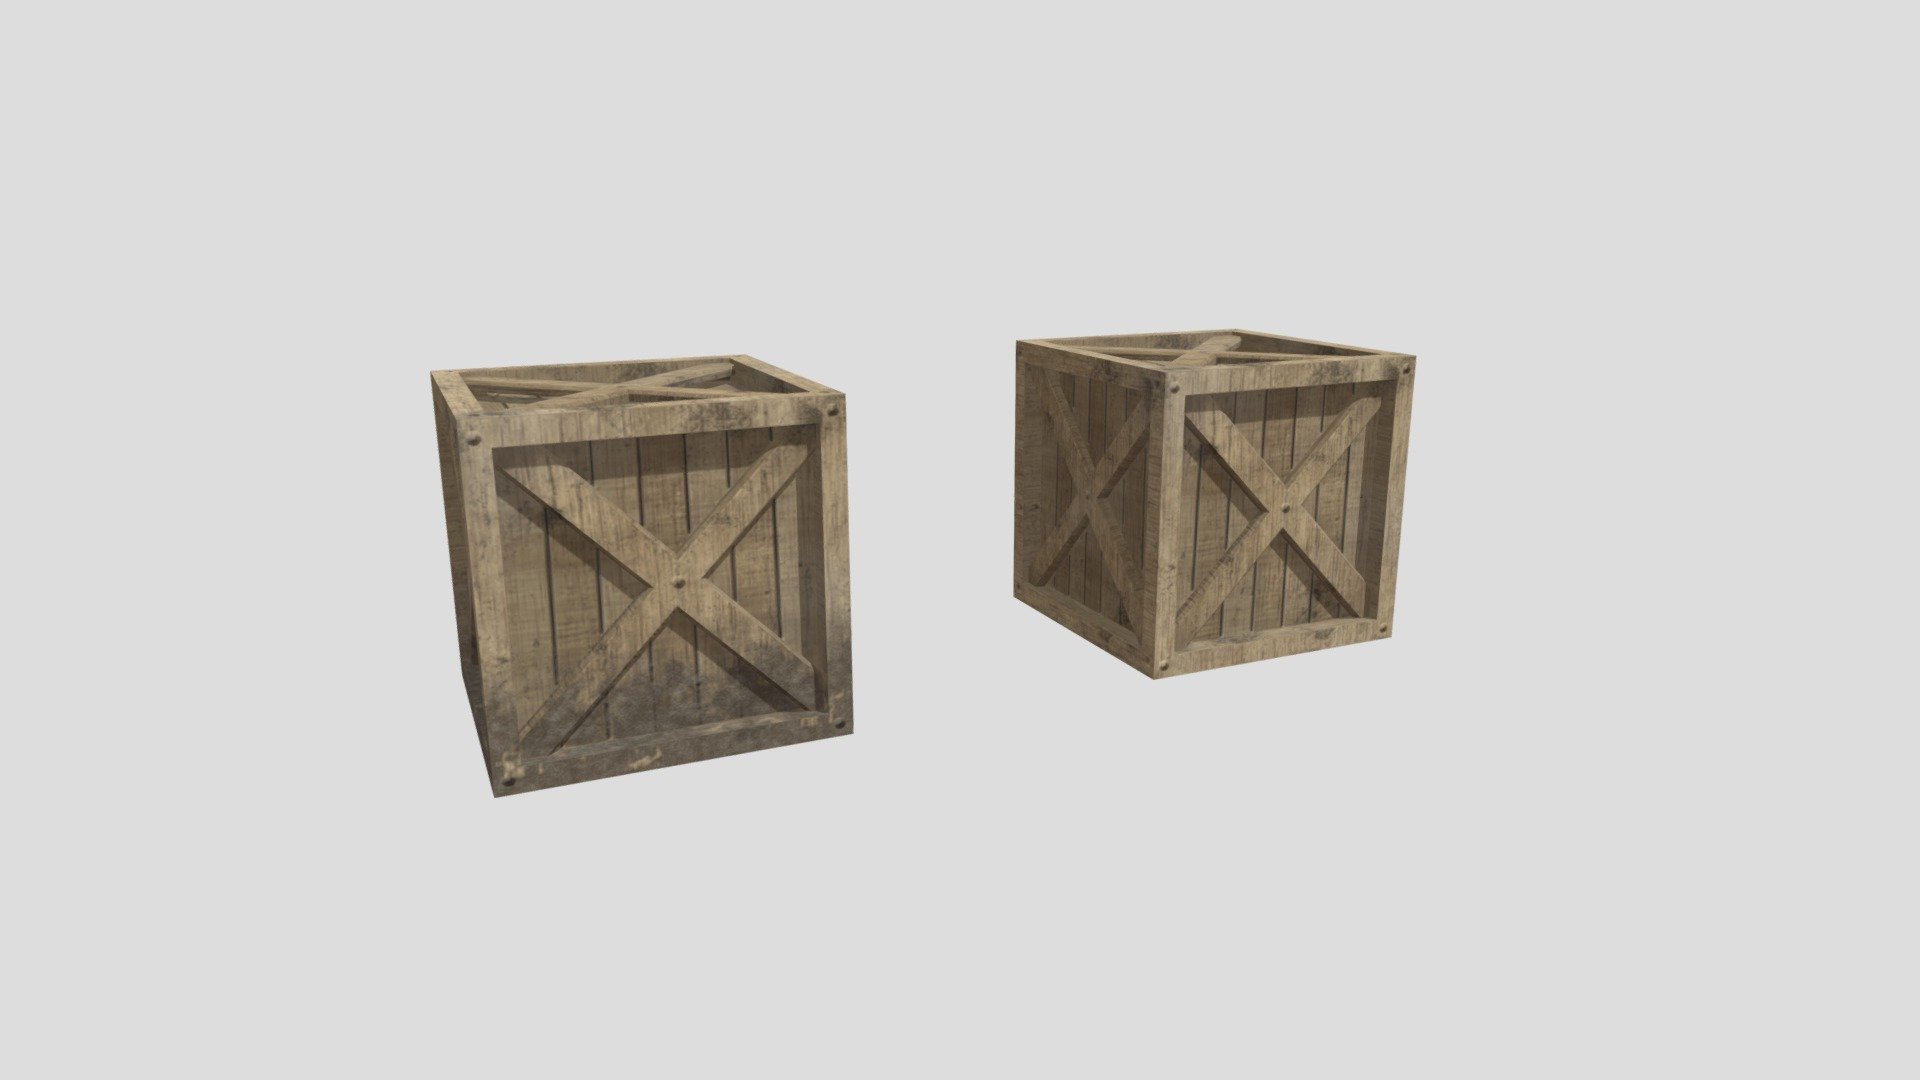 Wooden crates with crossed planks